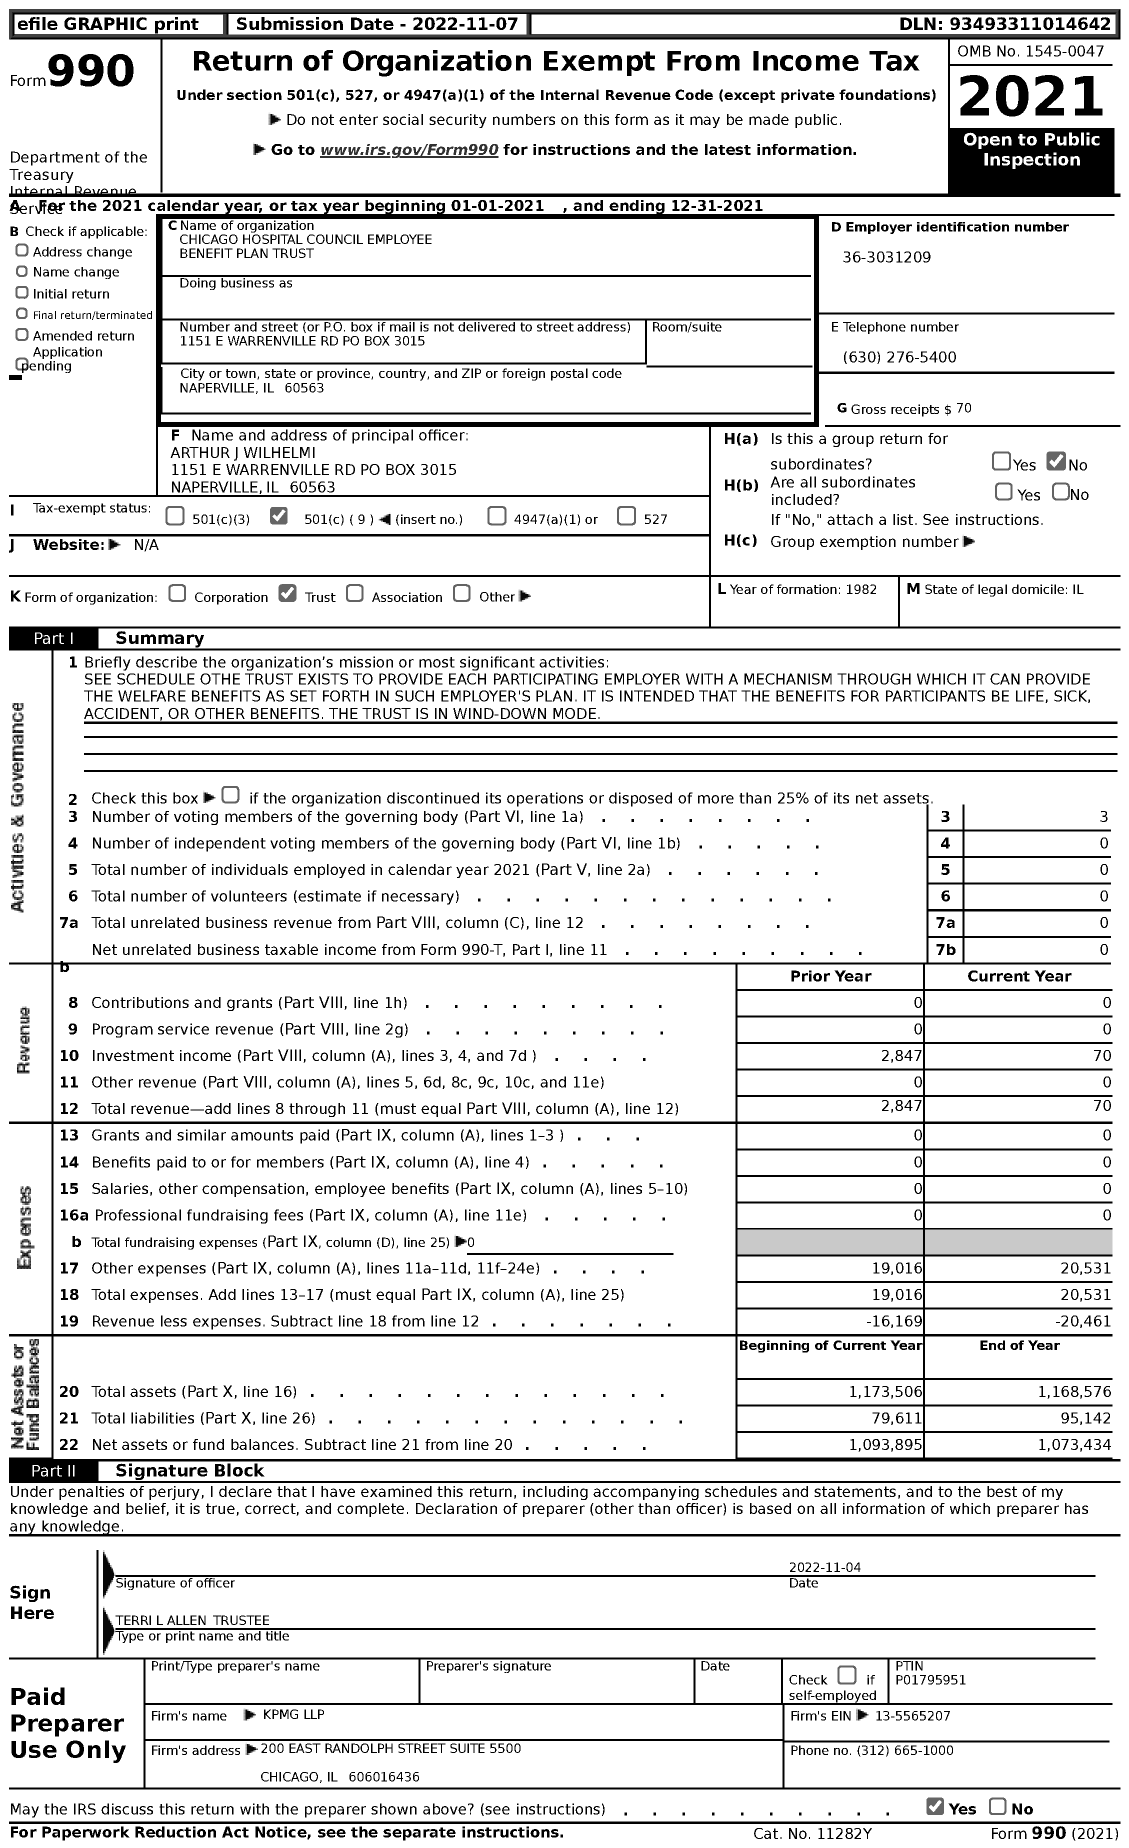 Image of first page of 2021 Form 990 for CHICAGO HOSPITAL Council Employee Benefit Plan Trust